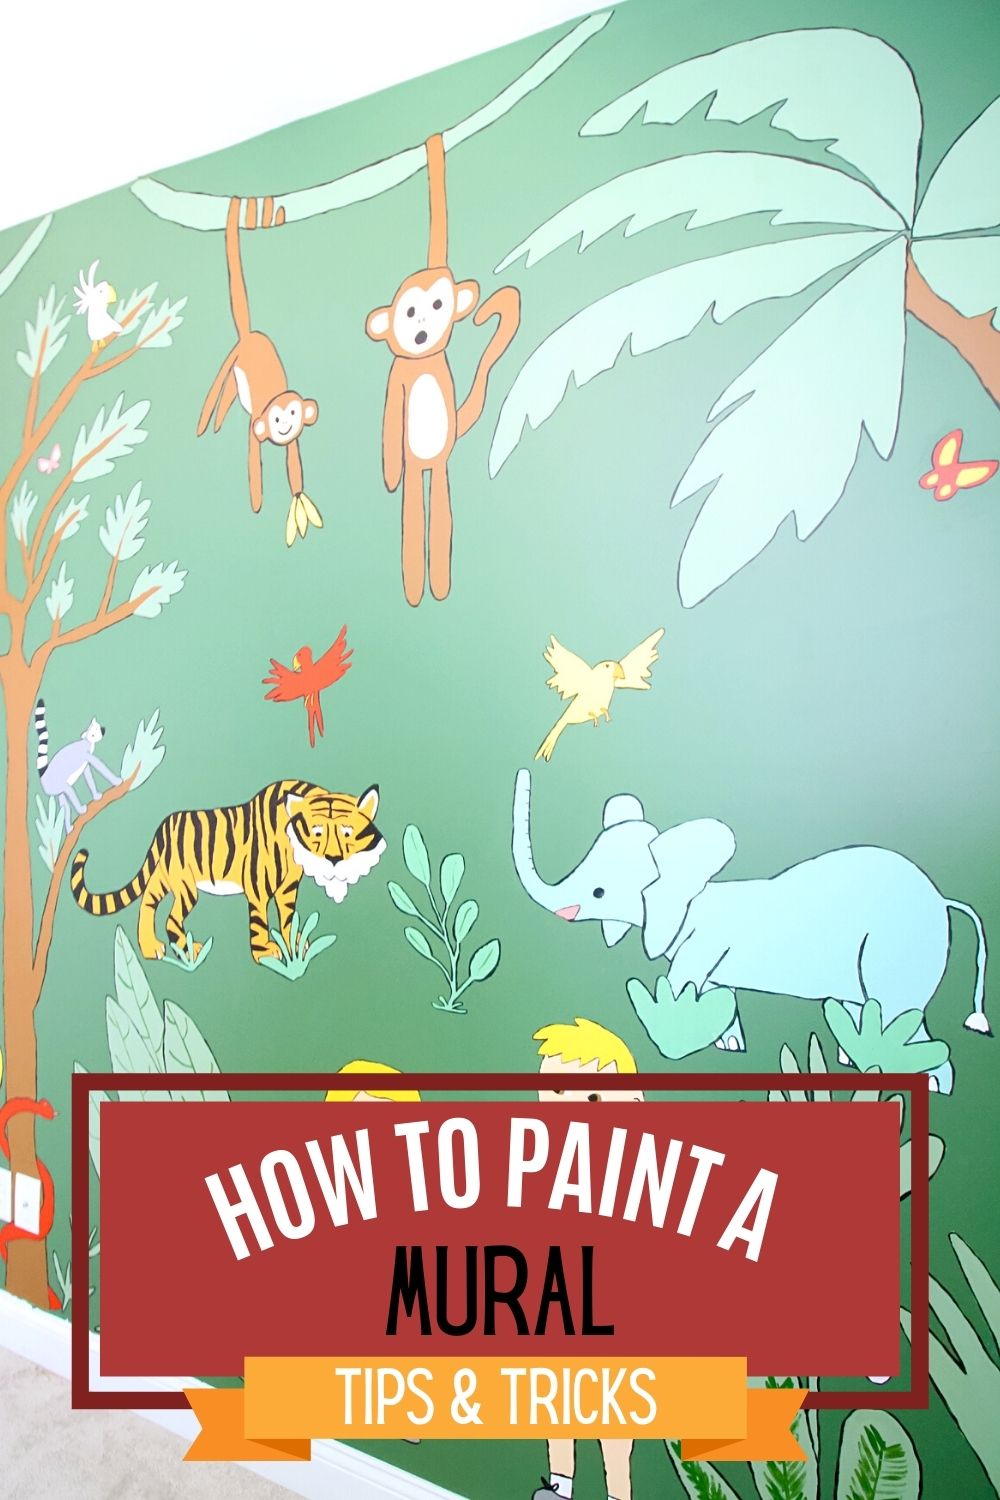 Mural Wall Painting - The Basic Techniques